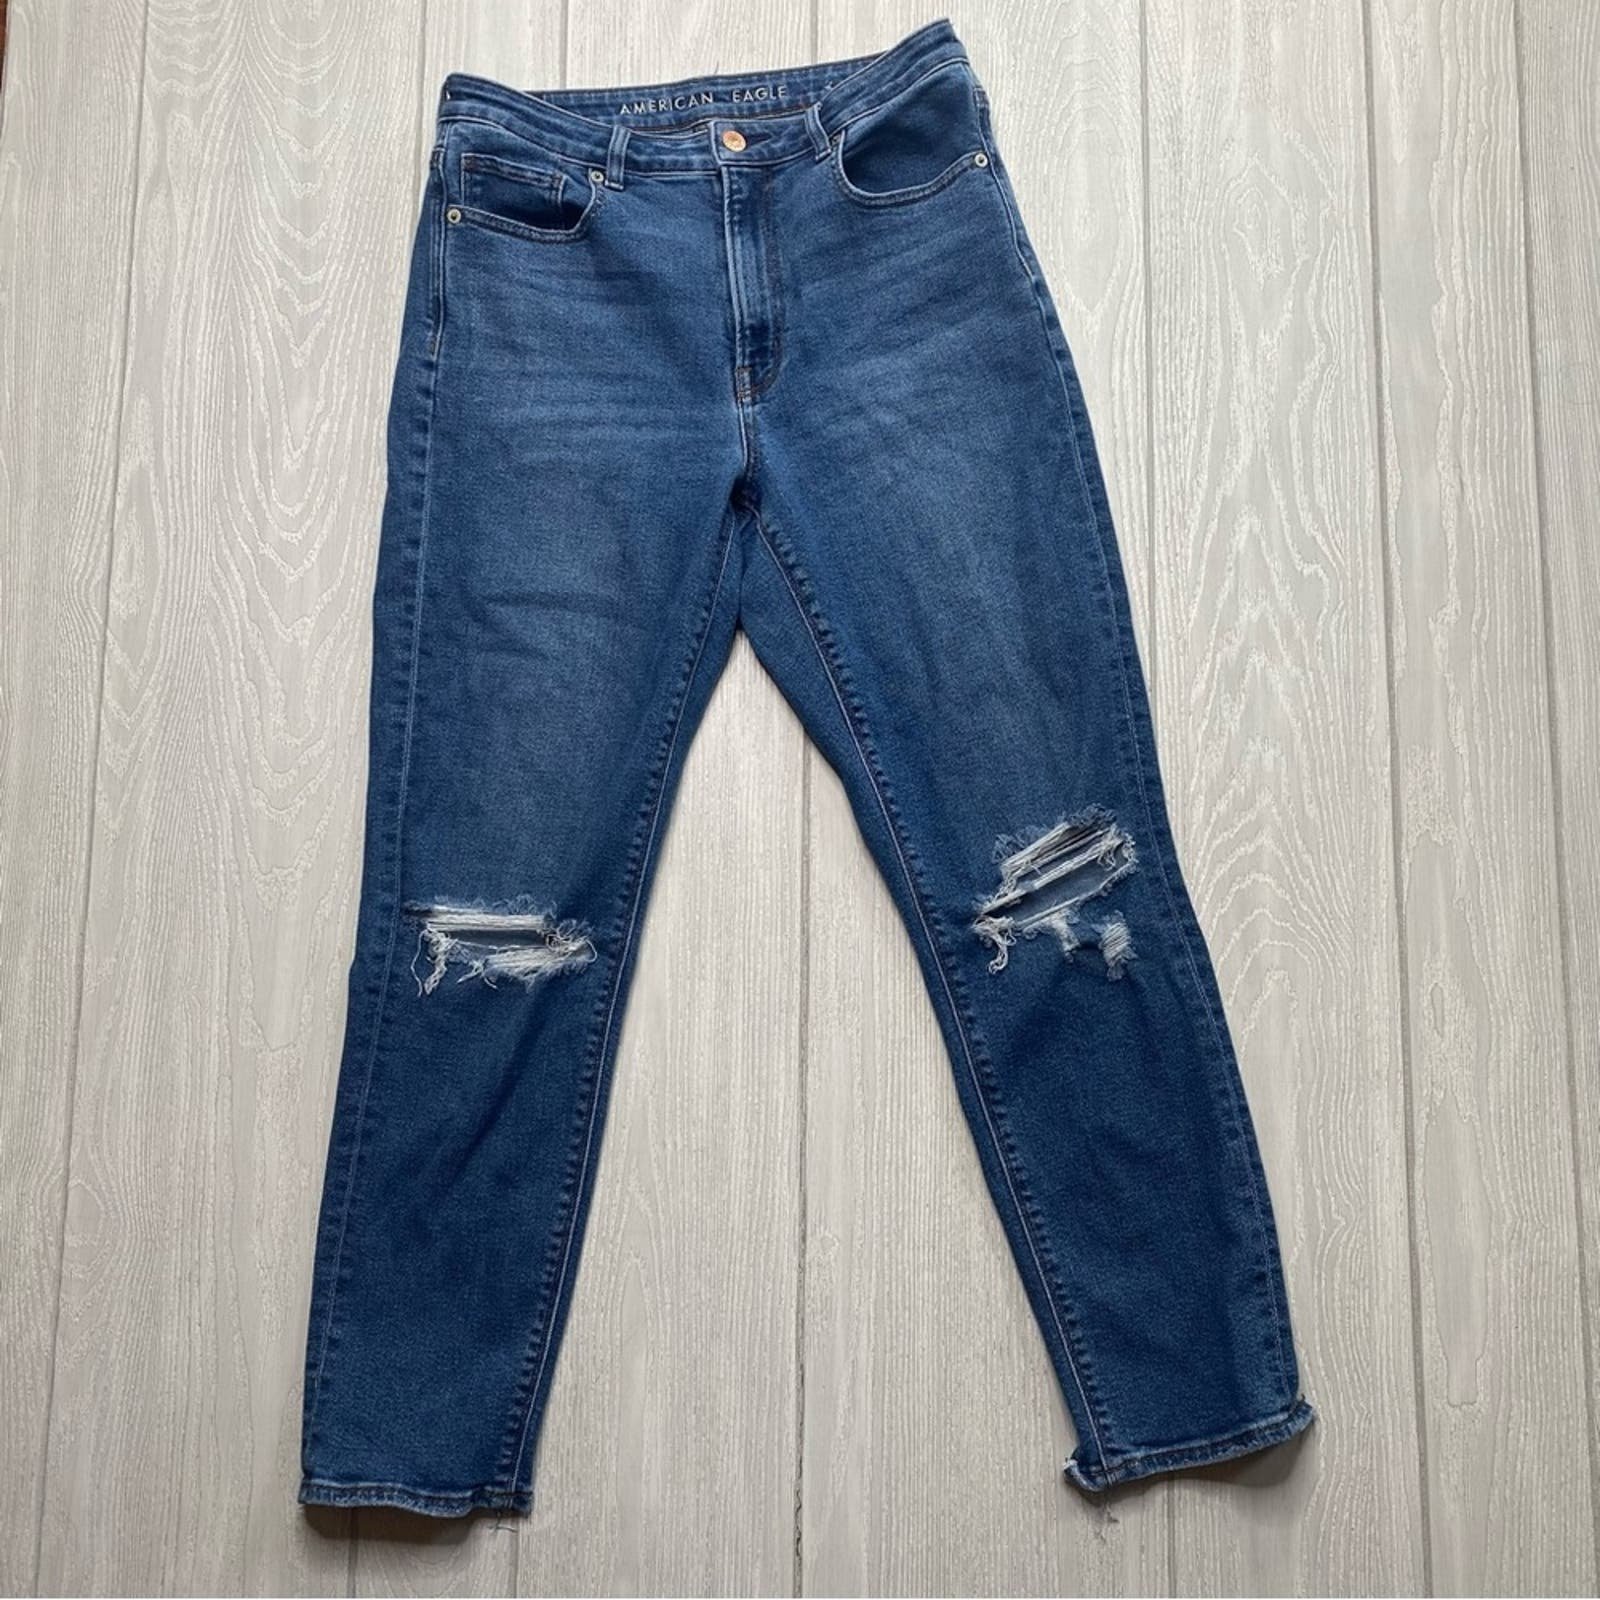 good price AMERICAN EAGLE WOMEN´S STRETCH DENIM BLUE RIPPED KNEE MOM JEANS SIZE 6 Le9fKw8U6 just for you